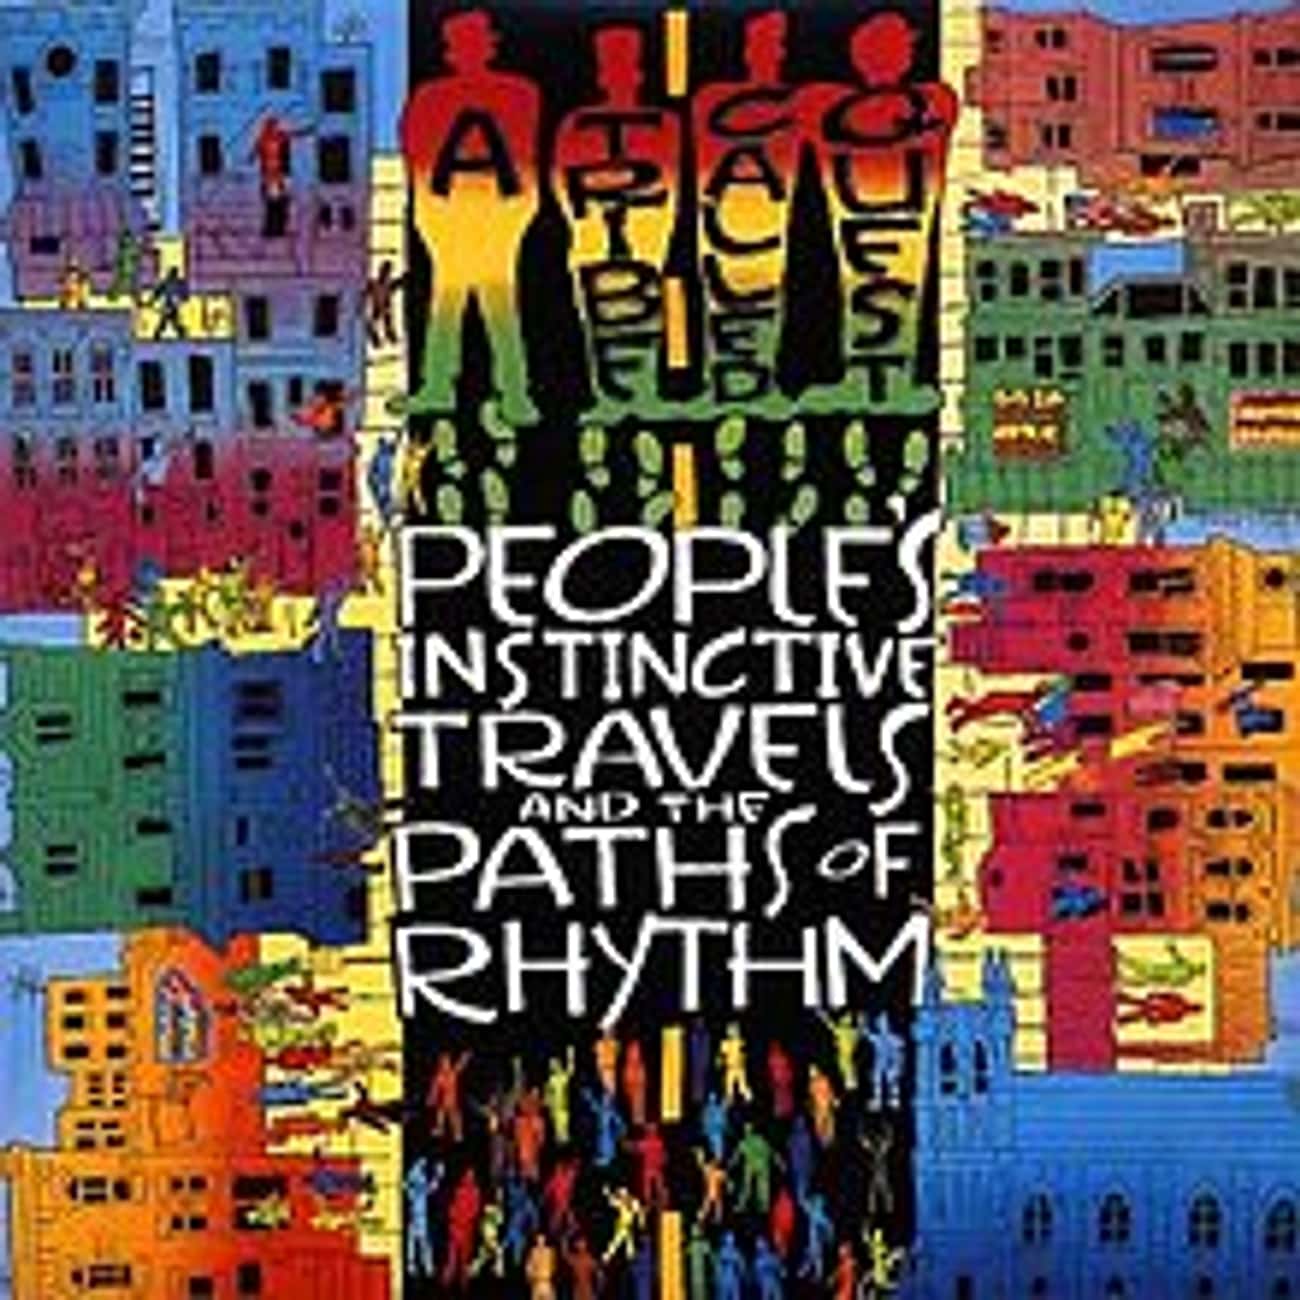 People&#39;s Instinctive Travels and the Paths of Rhythm